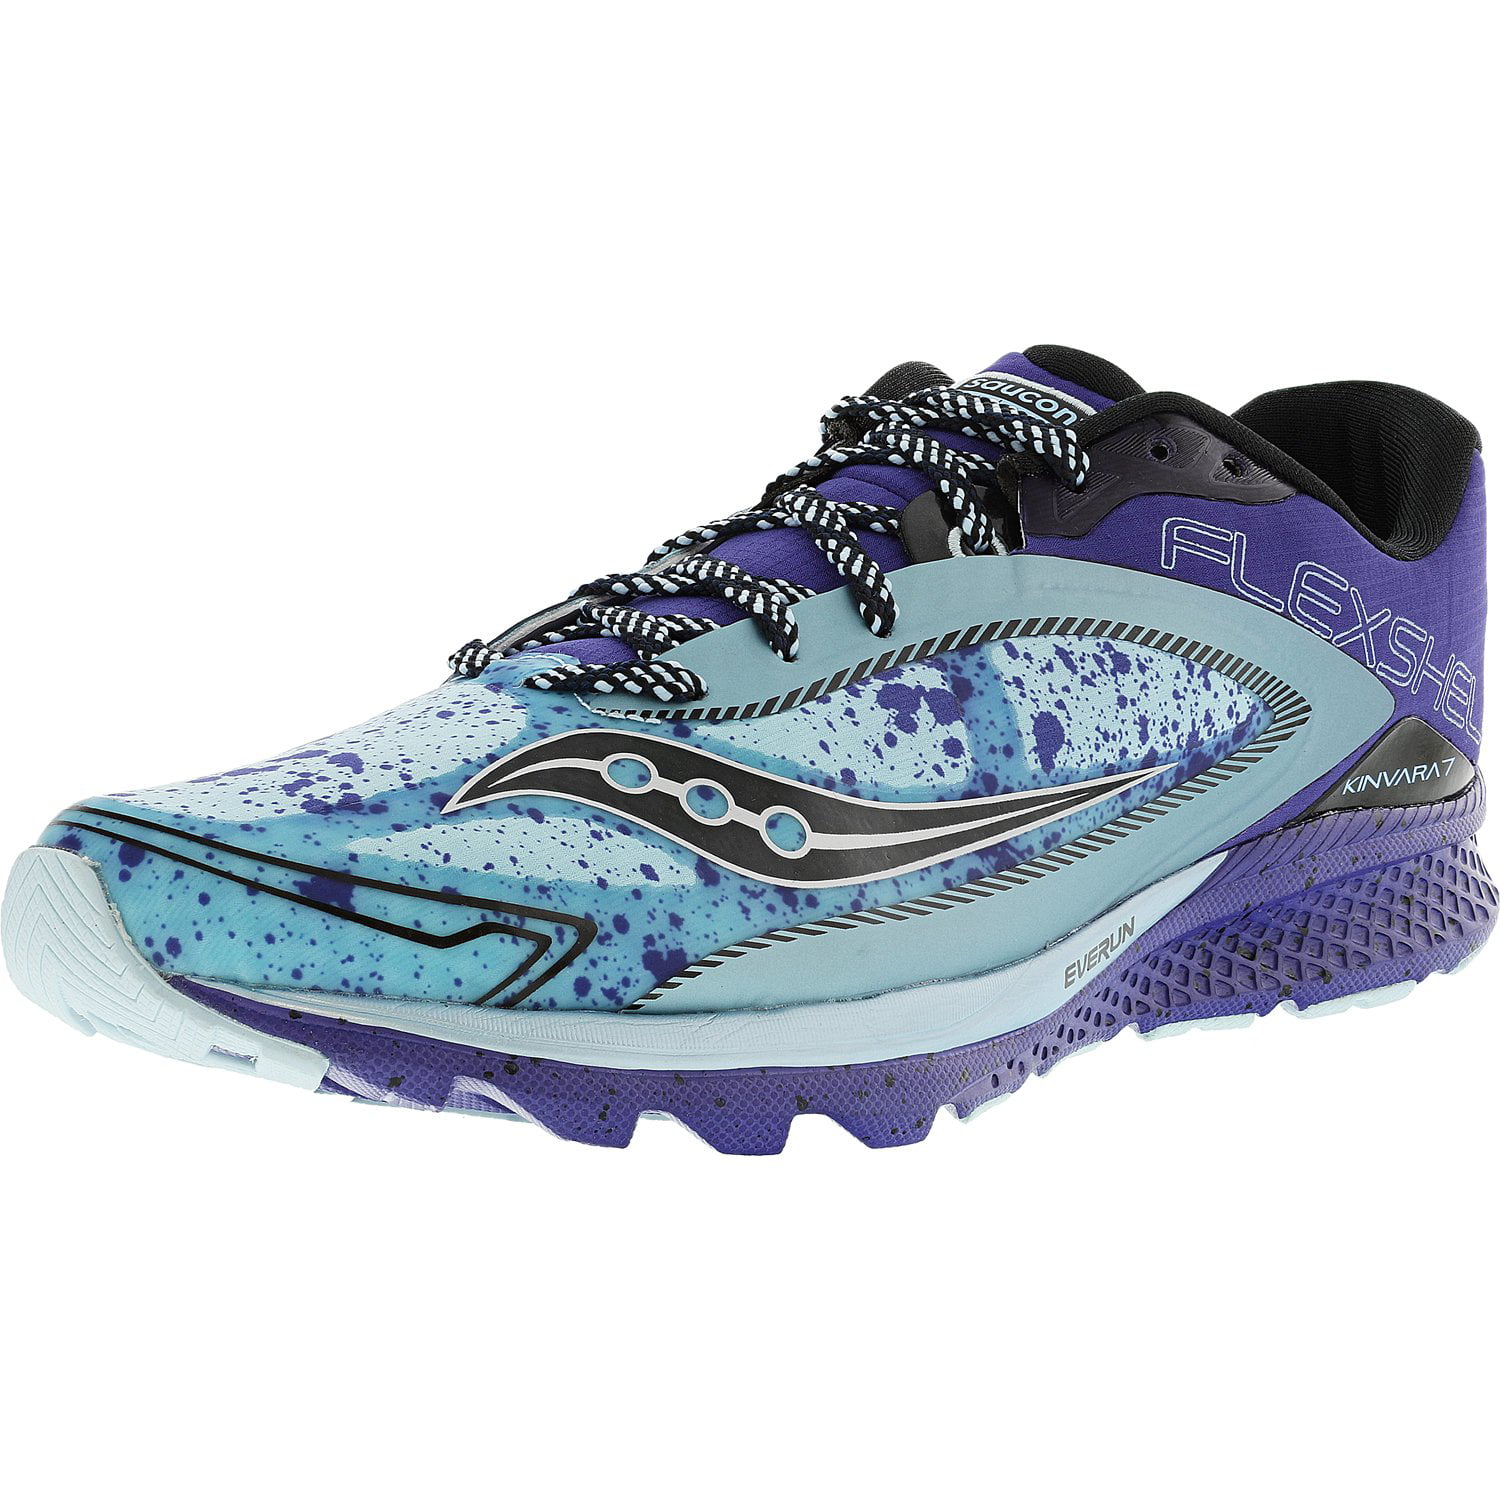 Blue Silver Ankle-High Running Shoe 